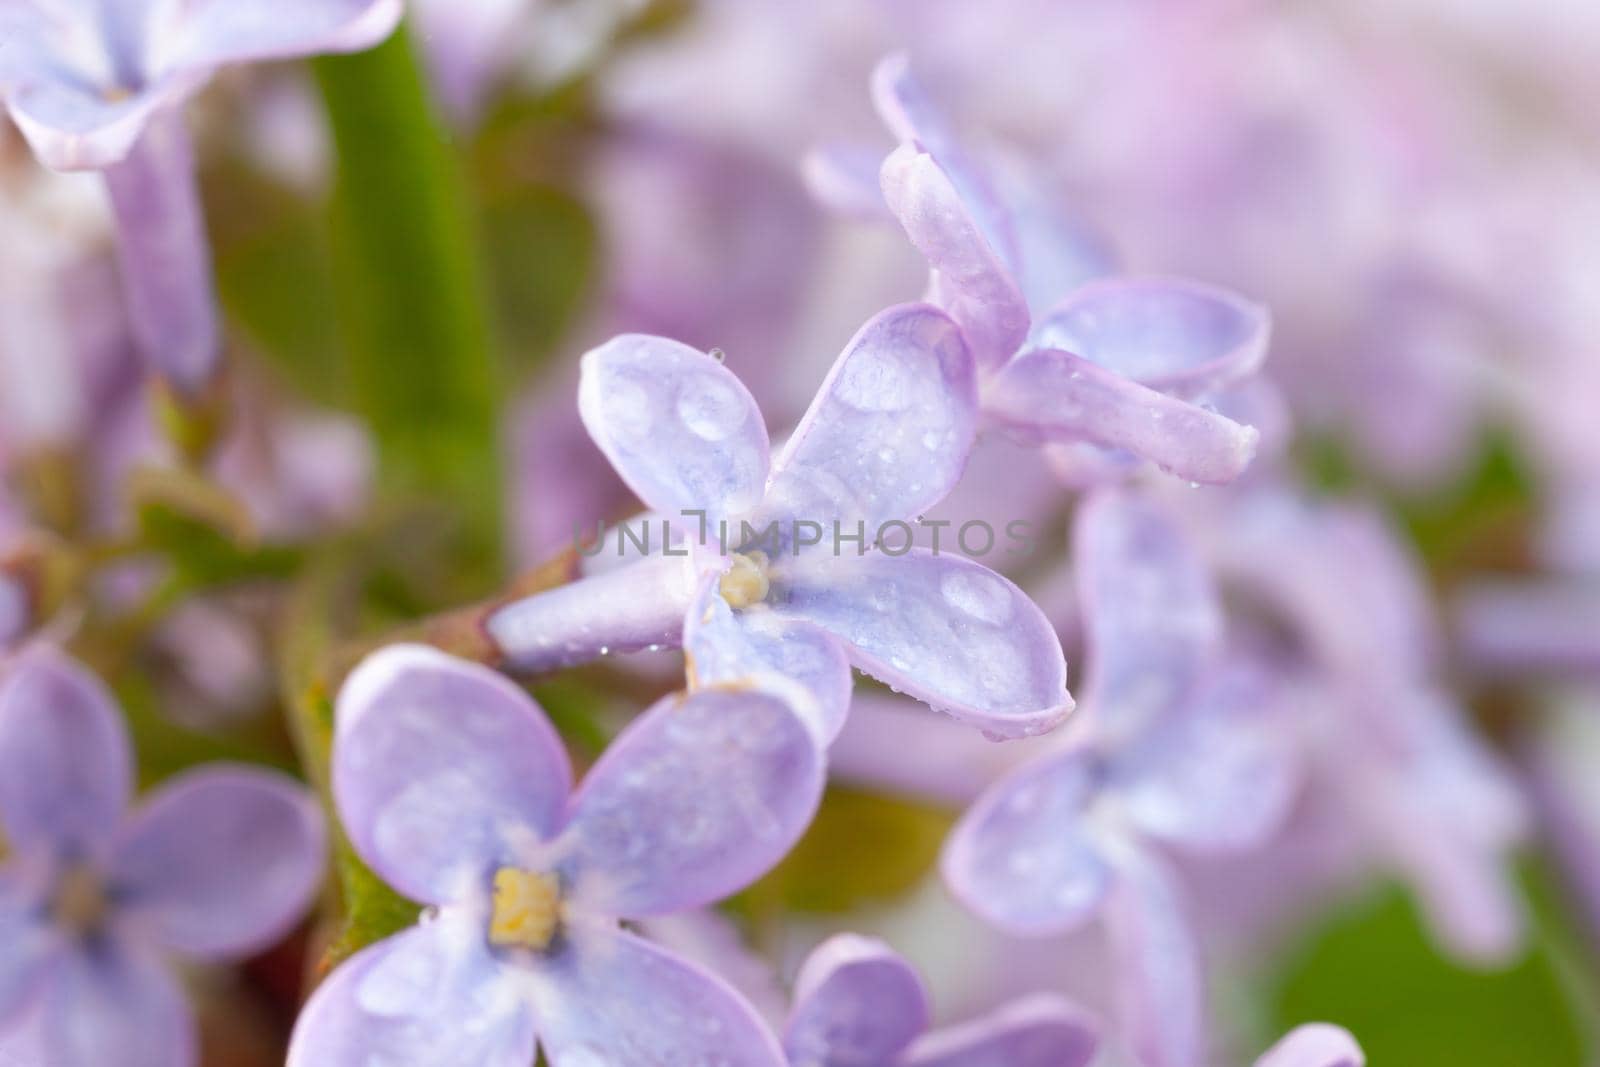 purple lilac branch, used as a background or texture